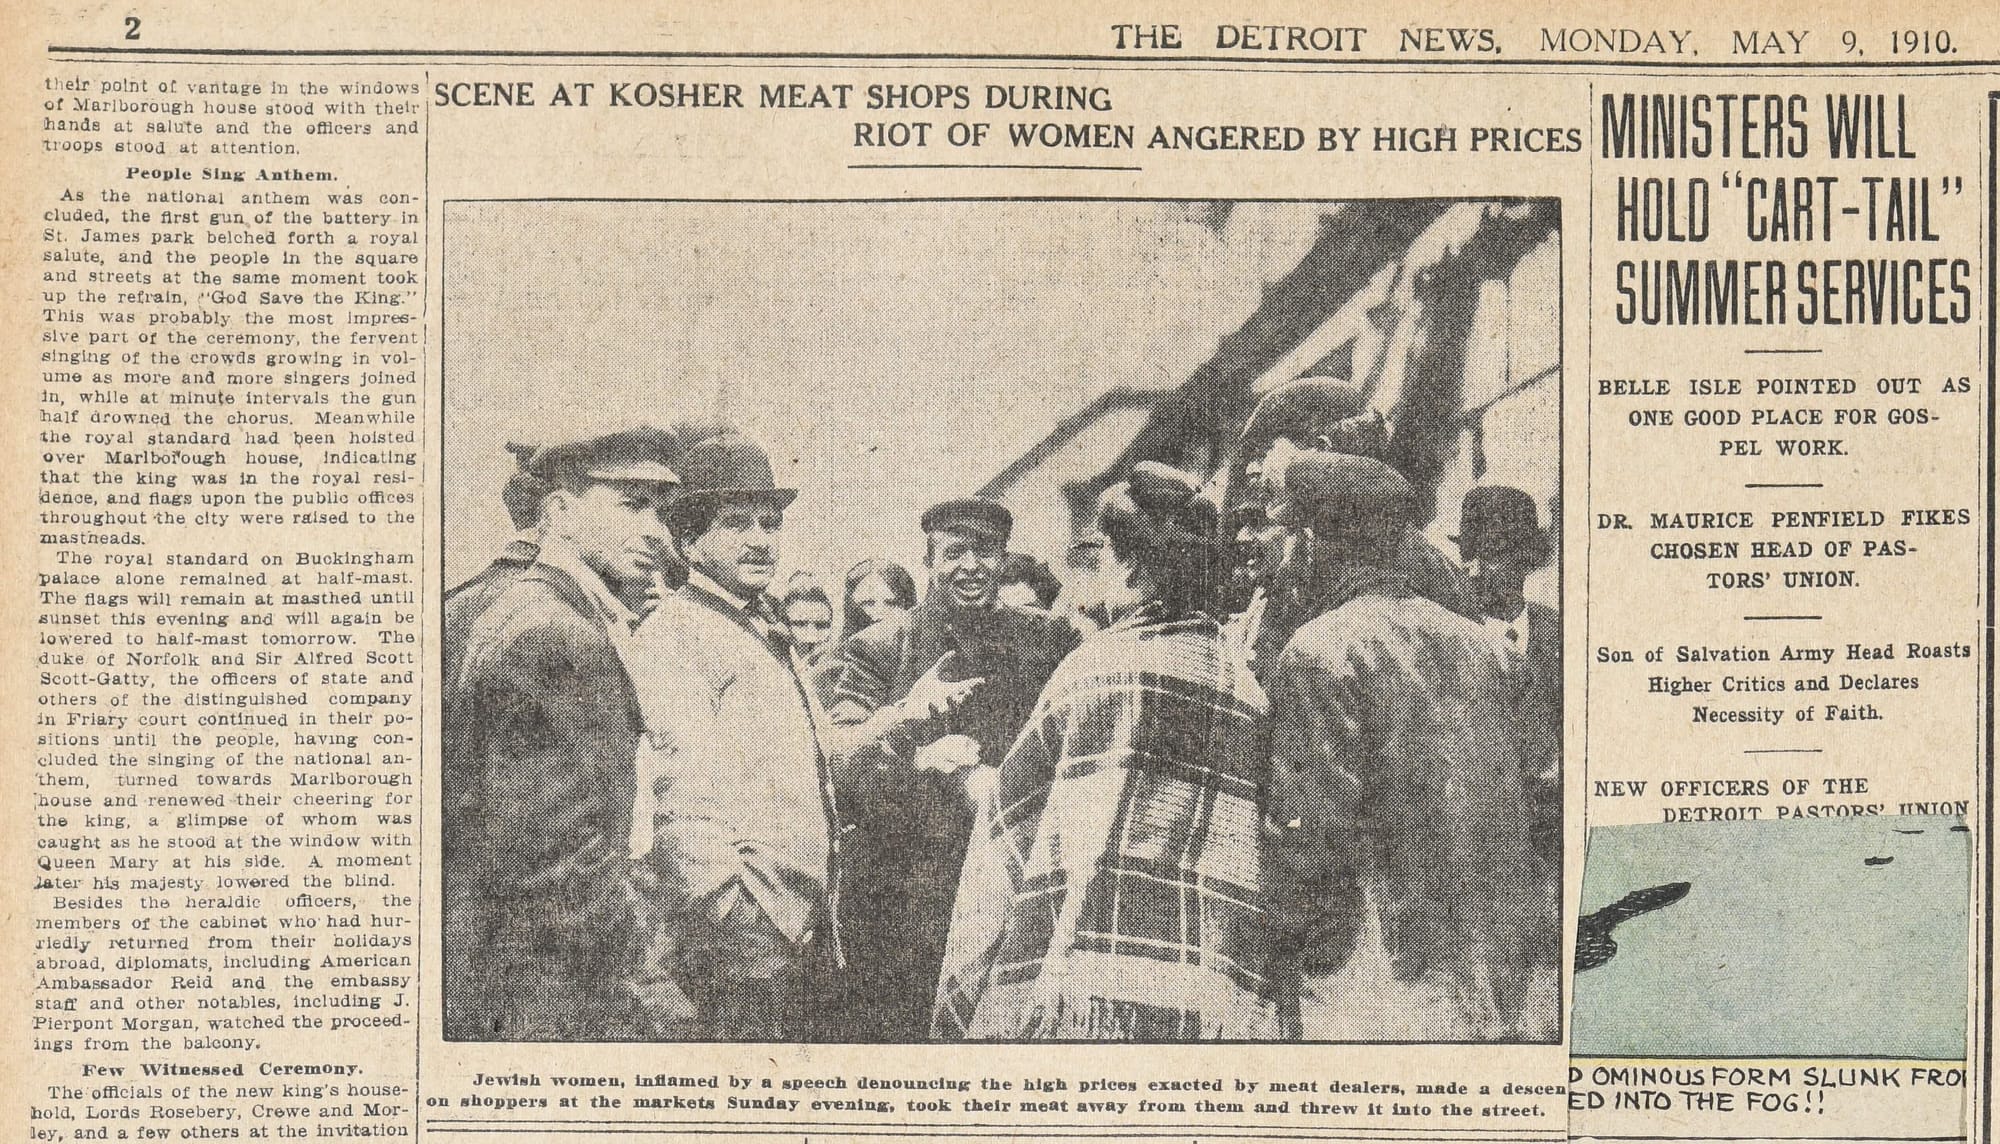 Everyday Life on Hastings Street: 1910 Kosher Meat Riot